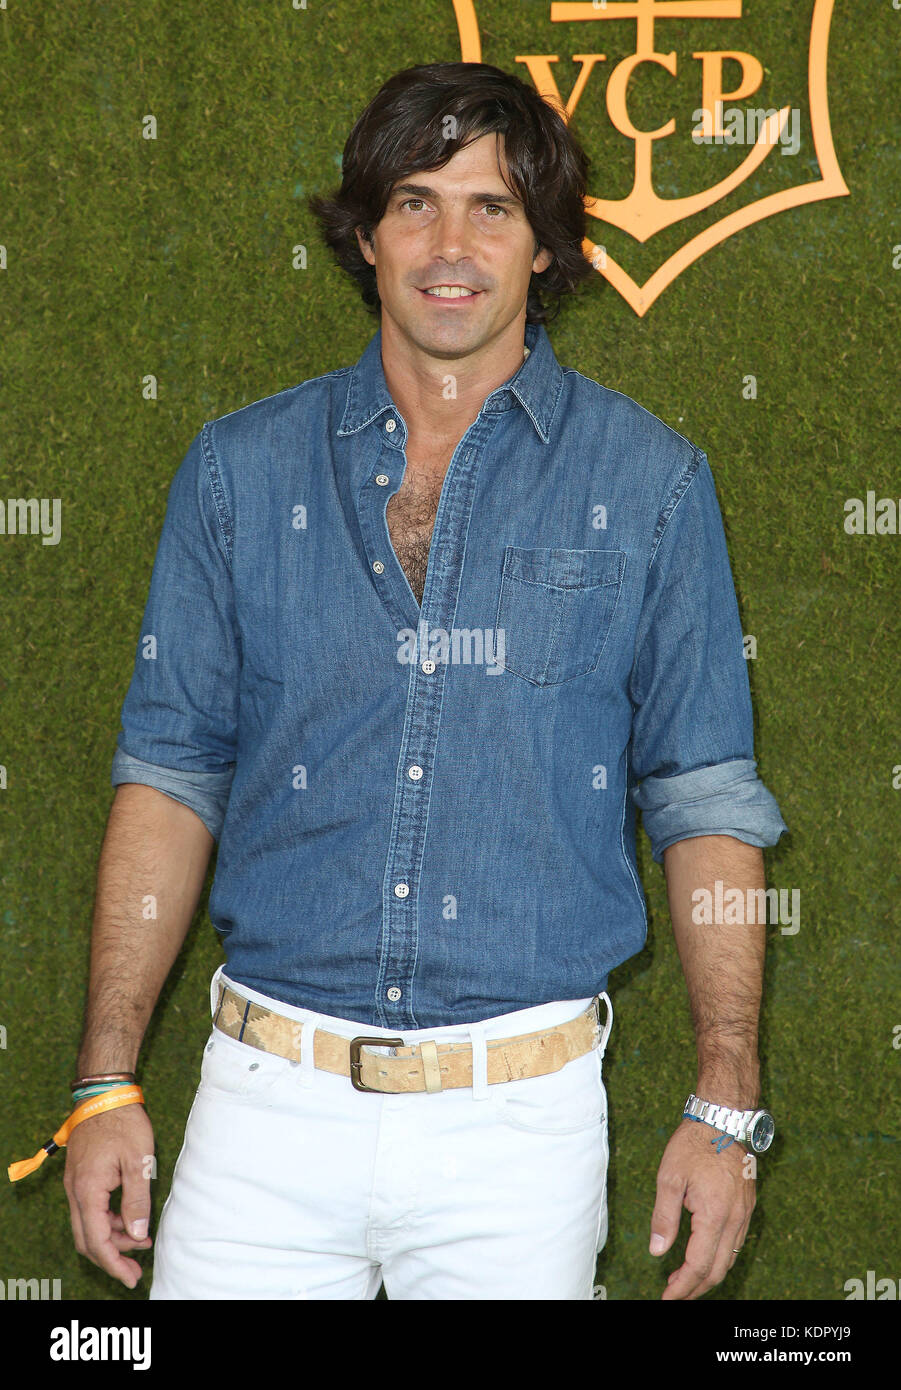 Pacific Palisades, California, USA. 14th Oct, 2017. Nacho Figueras. 8th Annual Veuve Clicquot Polo Classic held at at Will Rogers State Historic Park. Credit: ZUMA Press, Inc./Alamy Live News Stock Photo